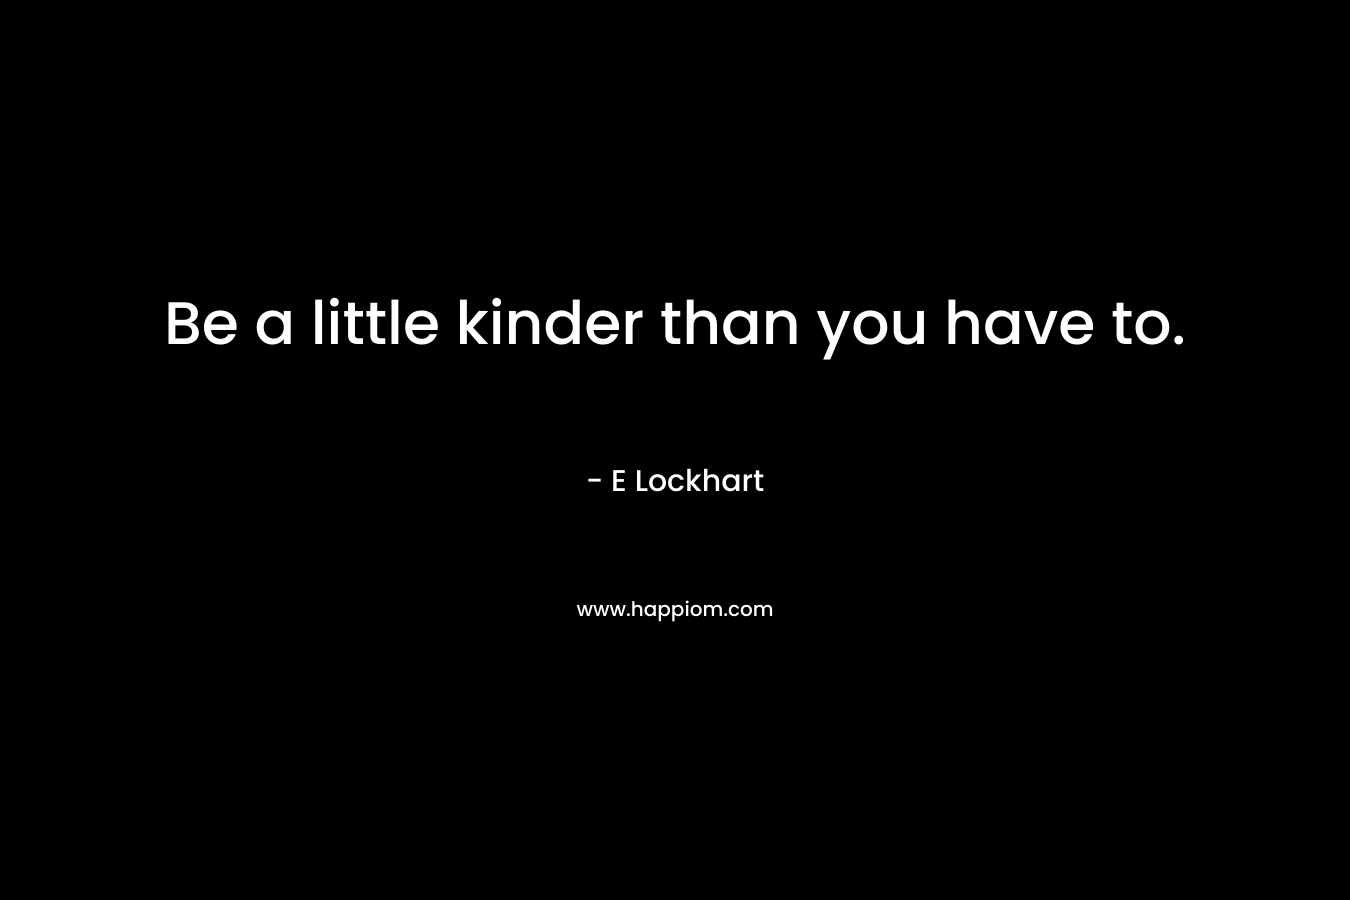 Be a little kinder than you have to. – E Lockhart